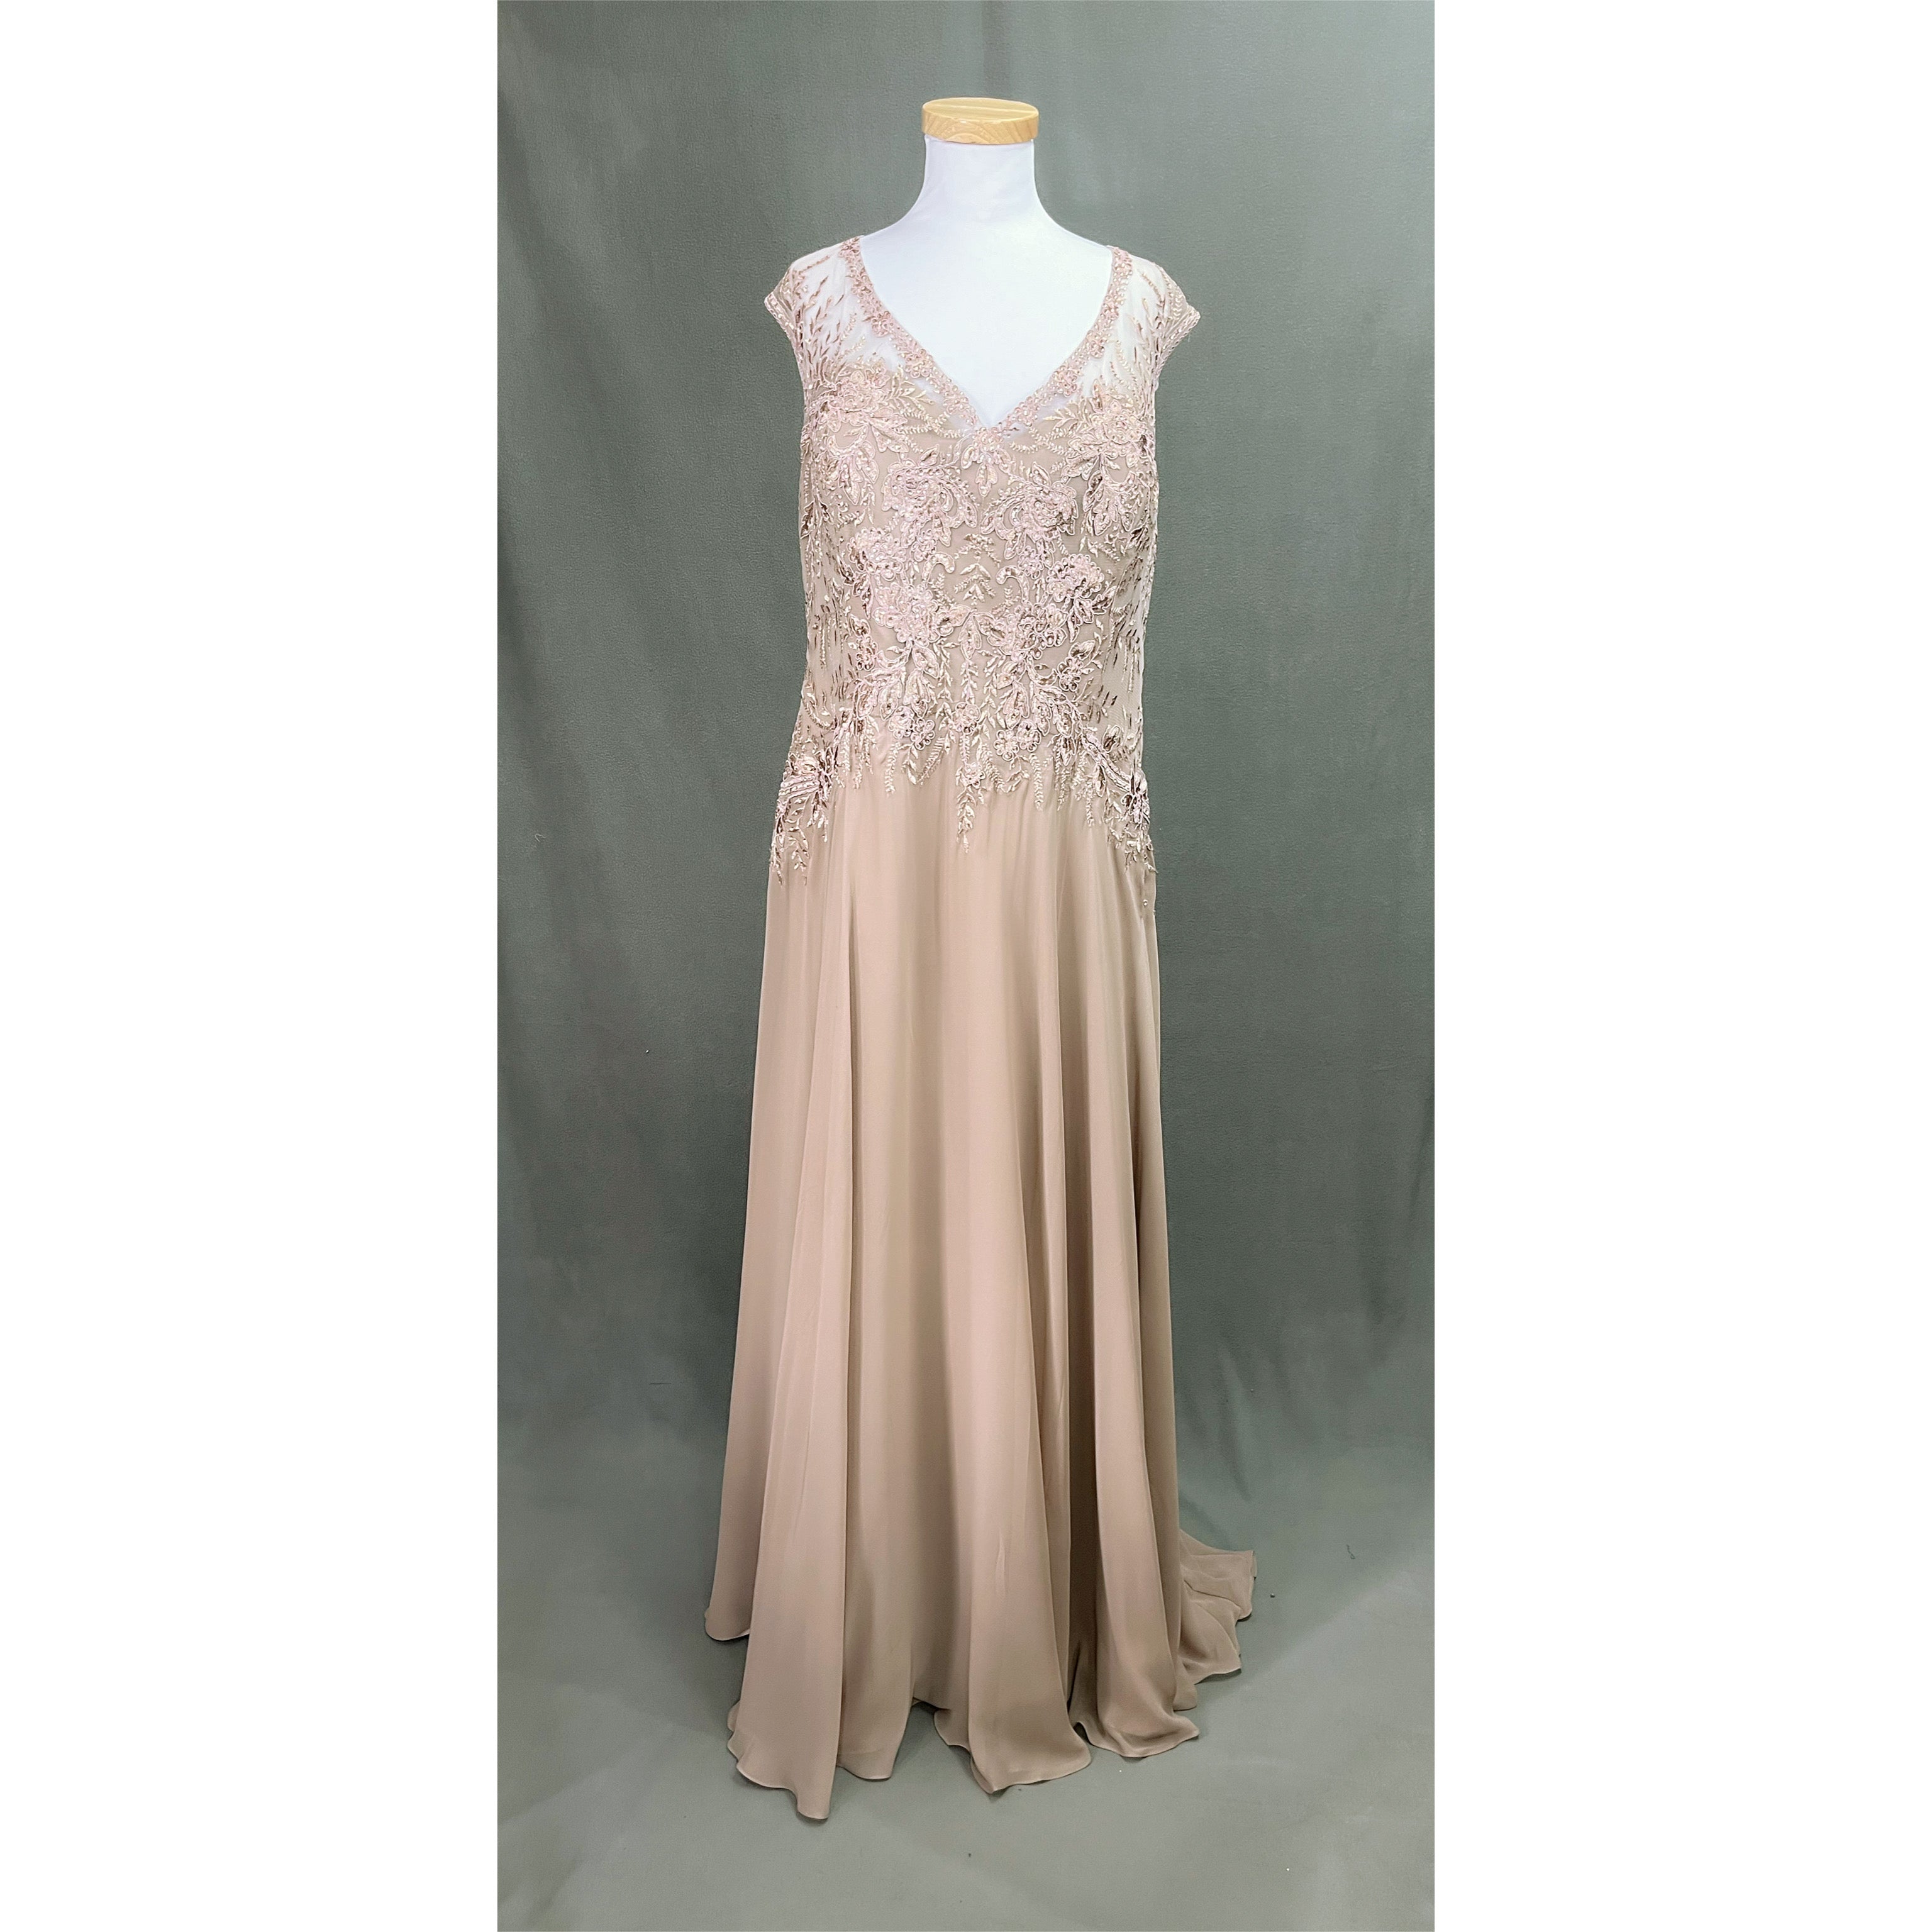 MGNY champagne dress, size 18, NEW WITH TAGS!